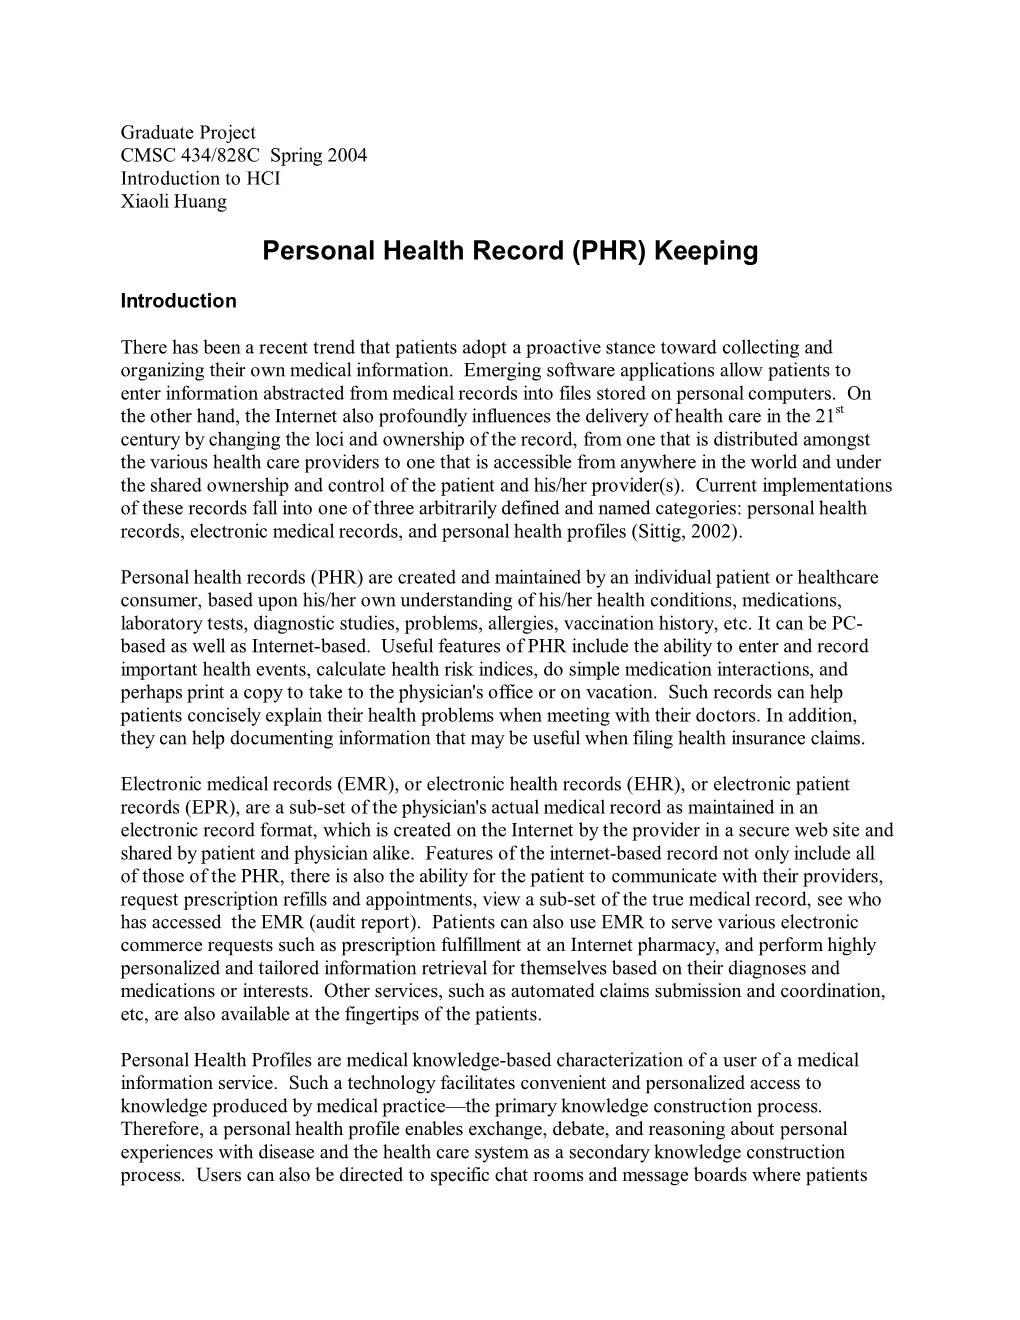 Personal Health Record (PHR) Keeping